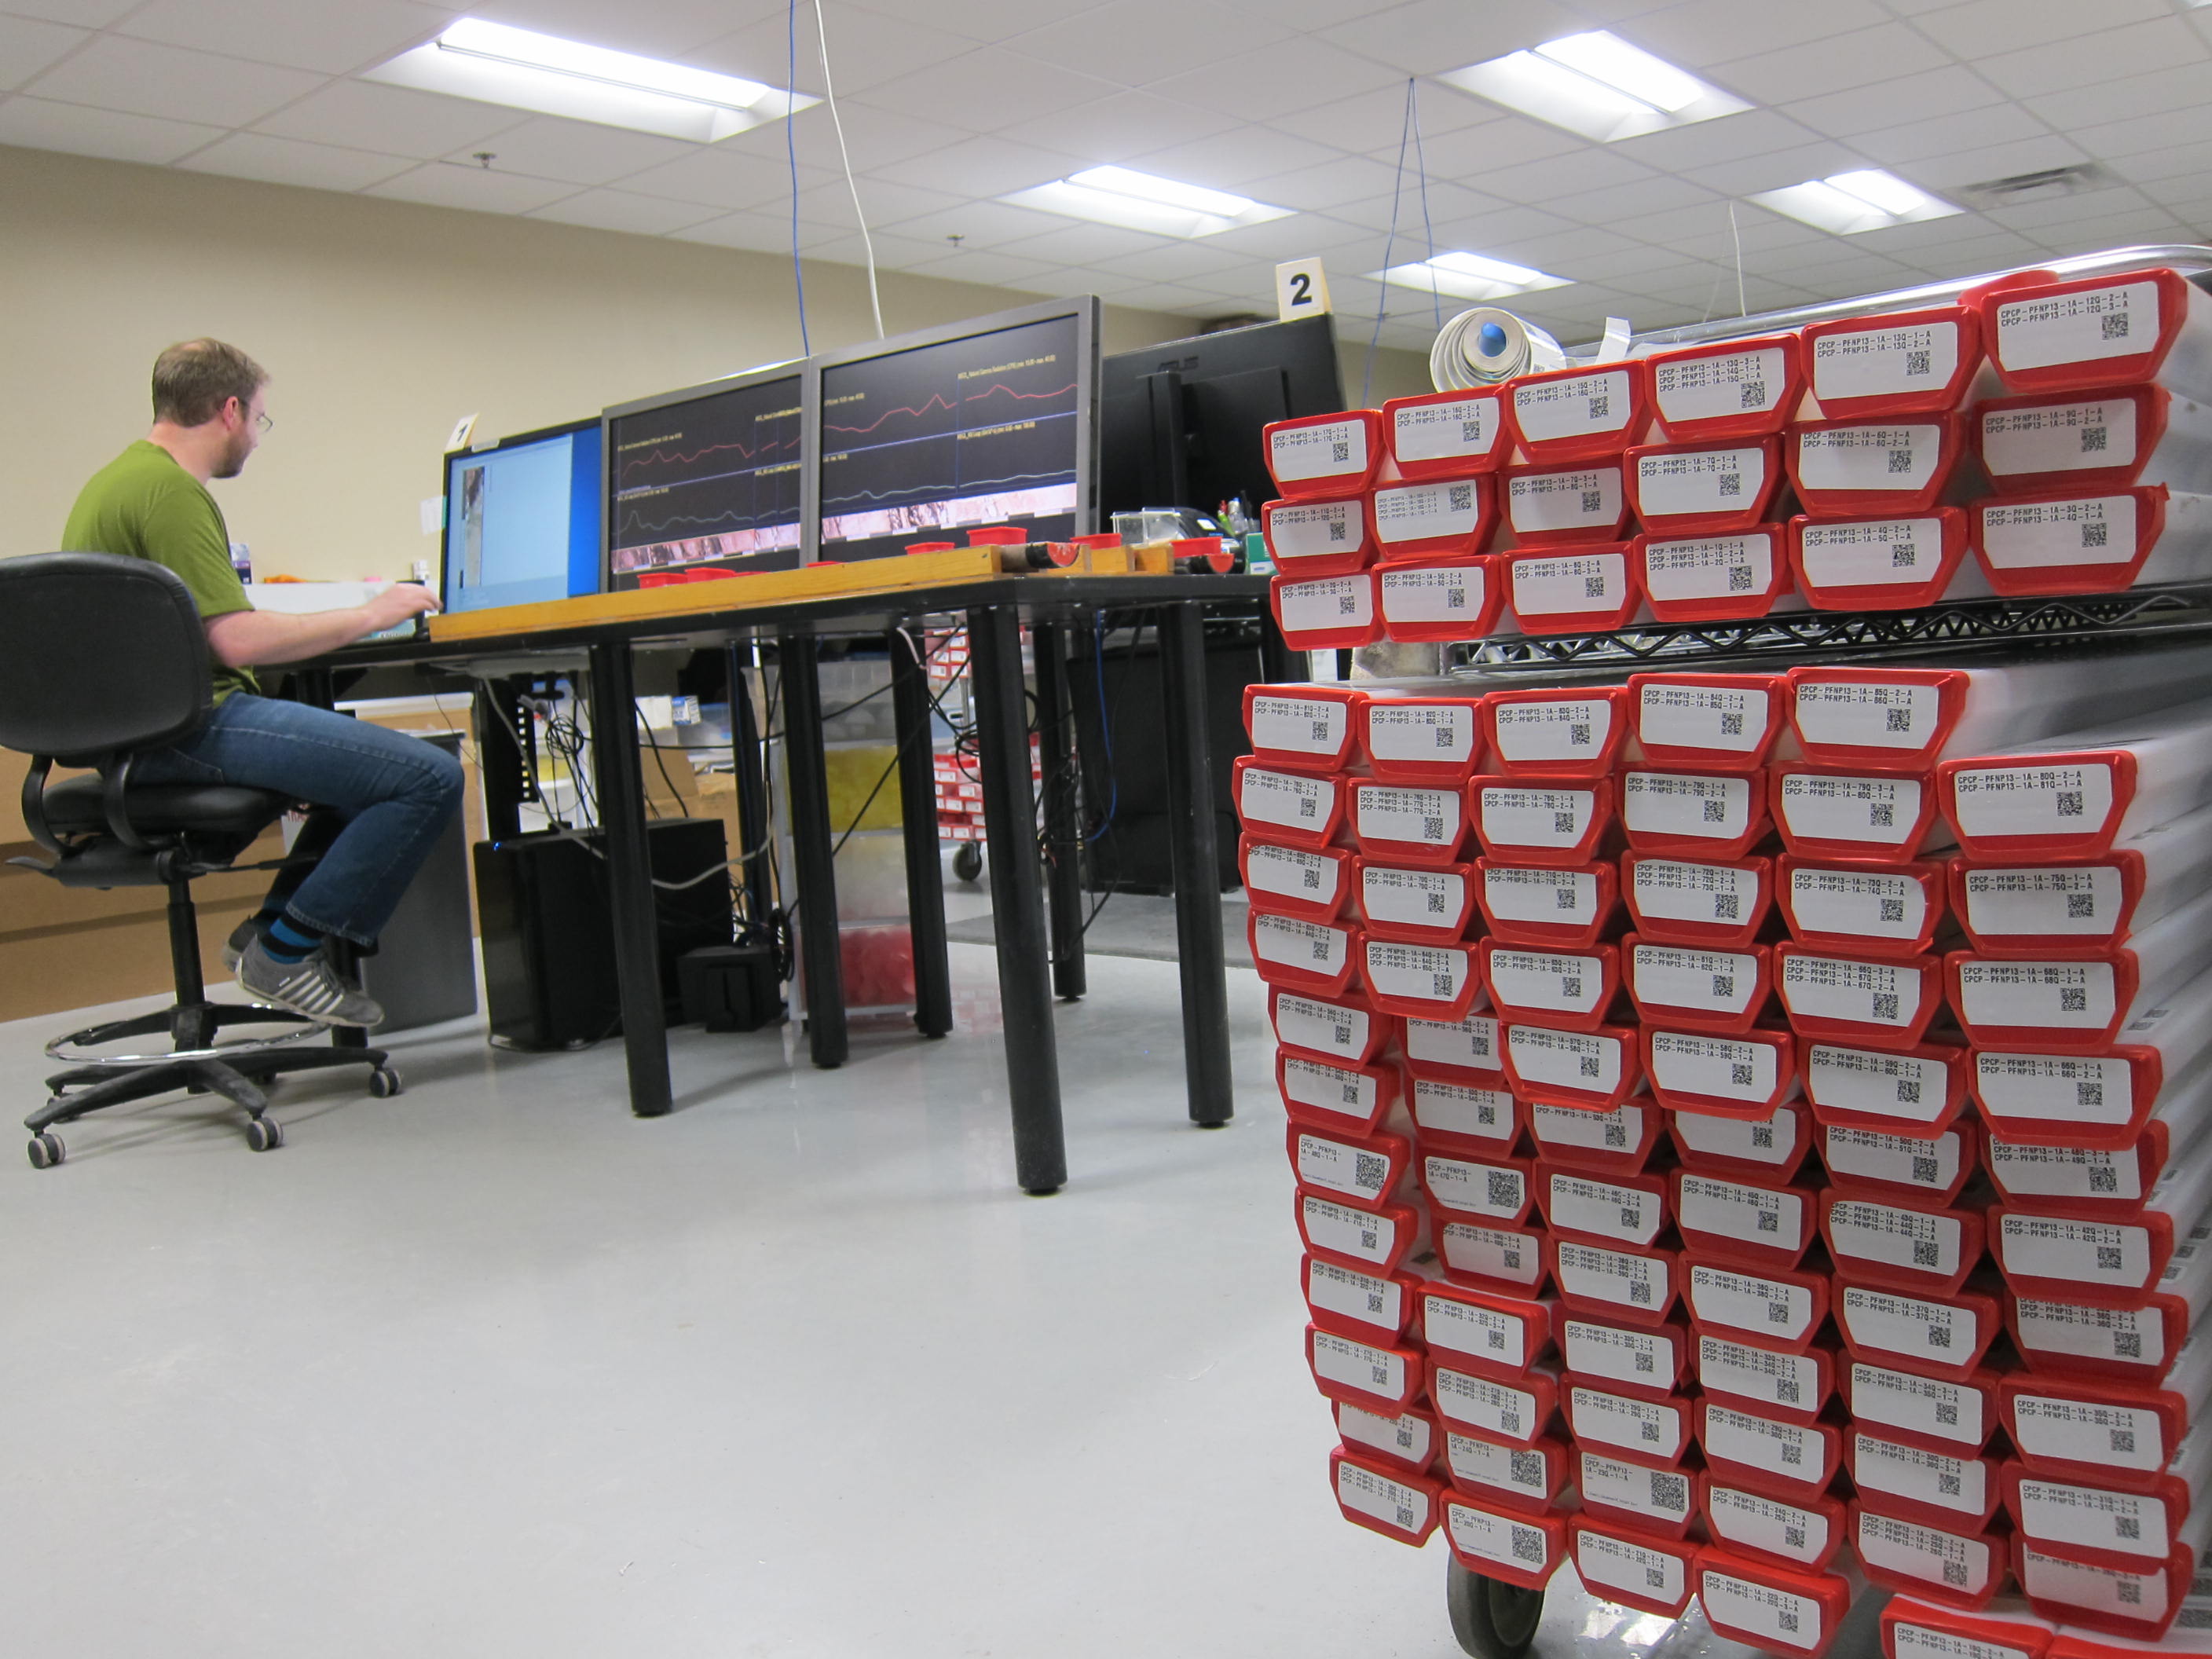 Cart full of D tubes with red caps indicating they are archive halves of the cores in the foreground with a researcher in the background analyzing data on a computer